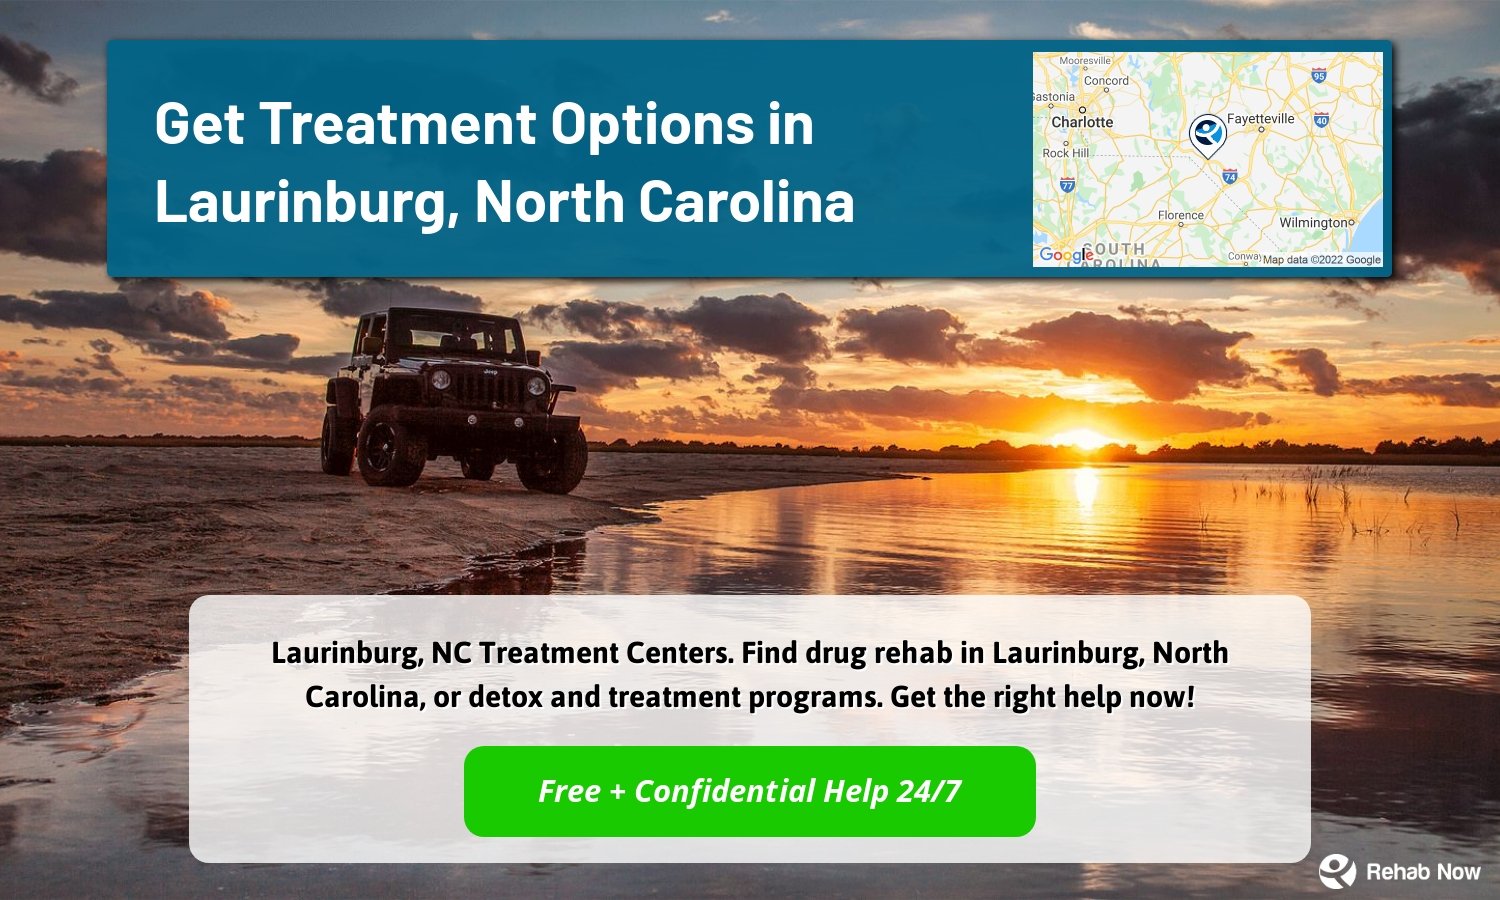 Laurinburg, NC Treatment Centers. Find drug rehab in Laurinburg, North Carolina, or detox and treatment programs. Get the right help now!